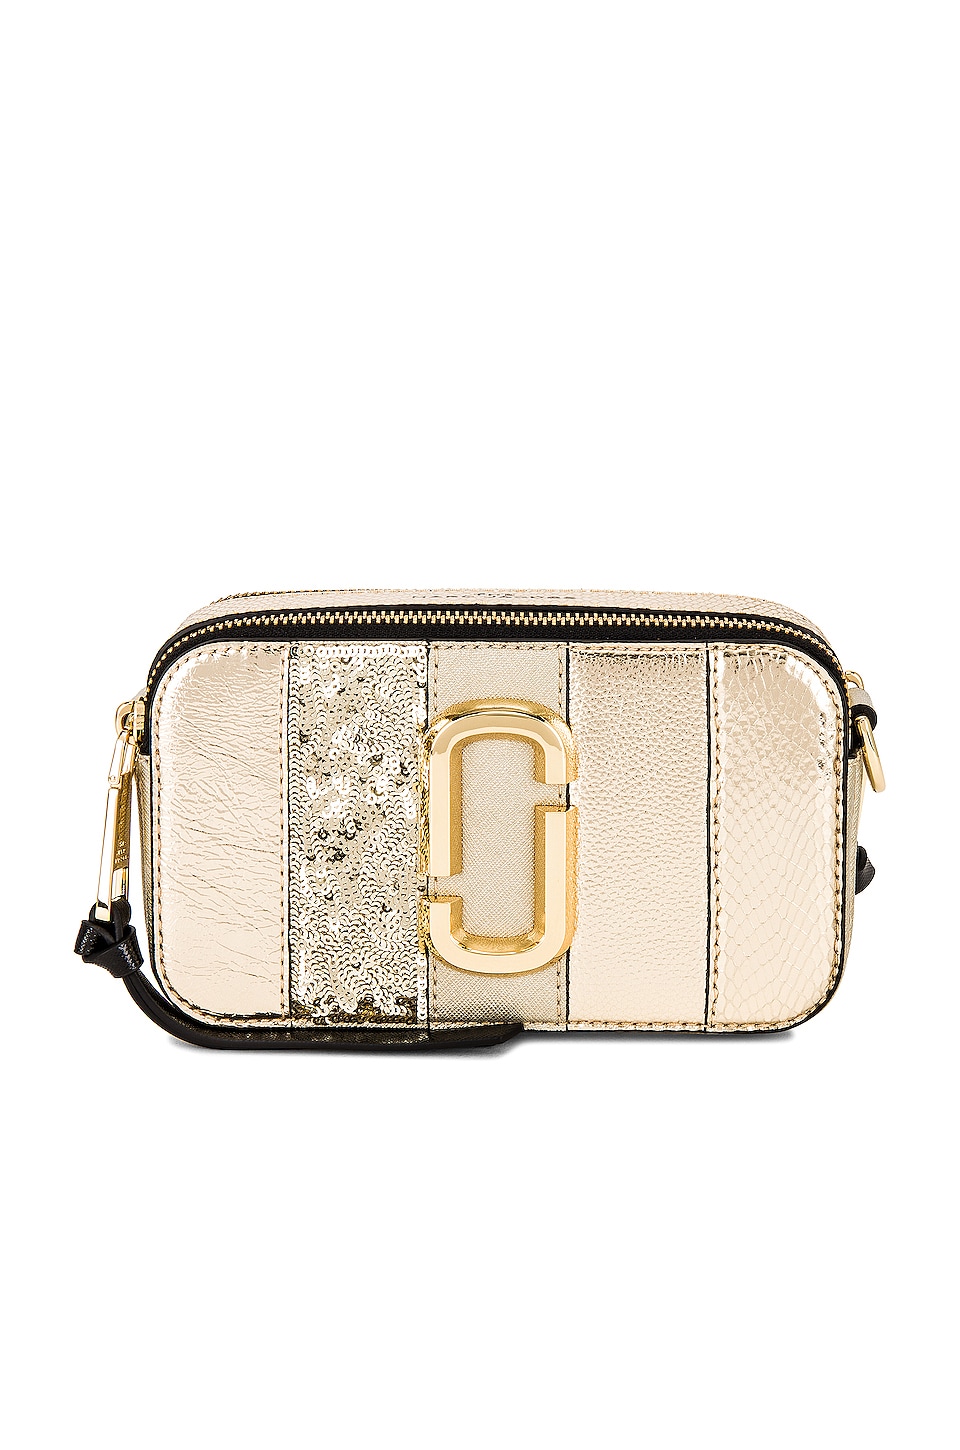 Marc Jacobs Snapshot Crossbody Bag's Review— Curated by Rosi